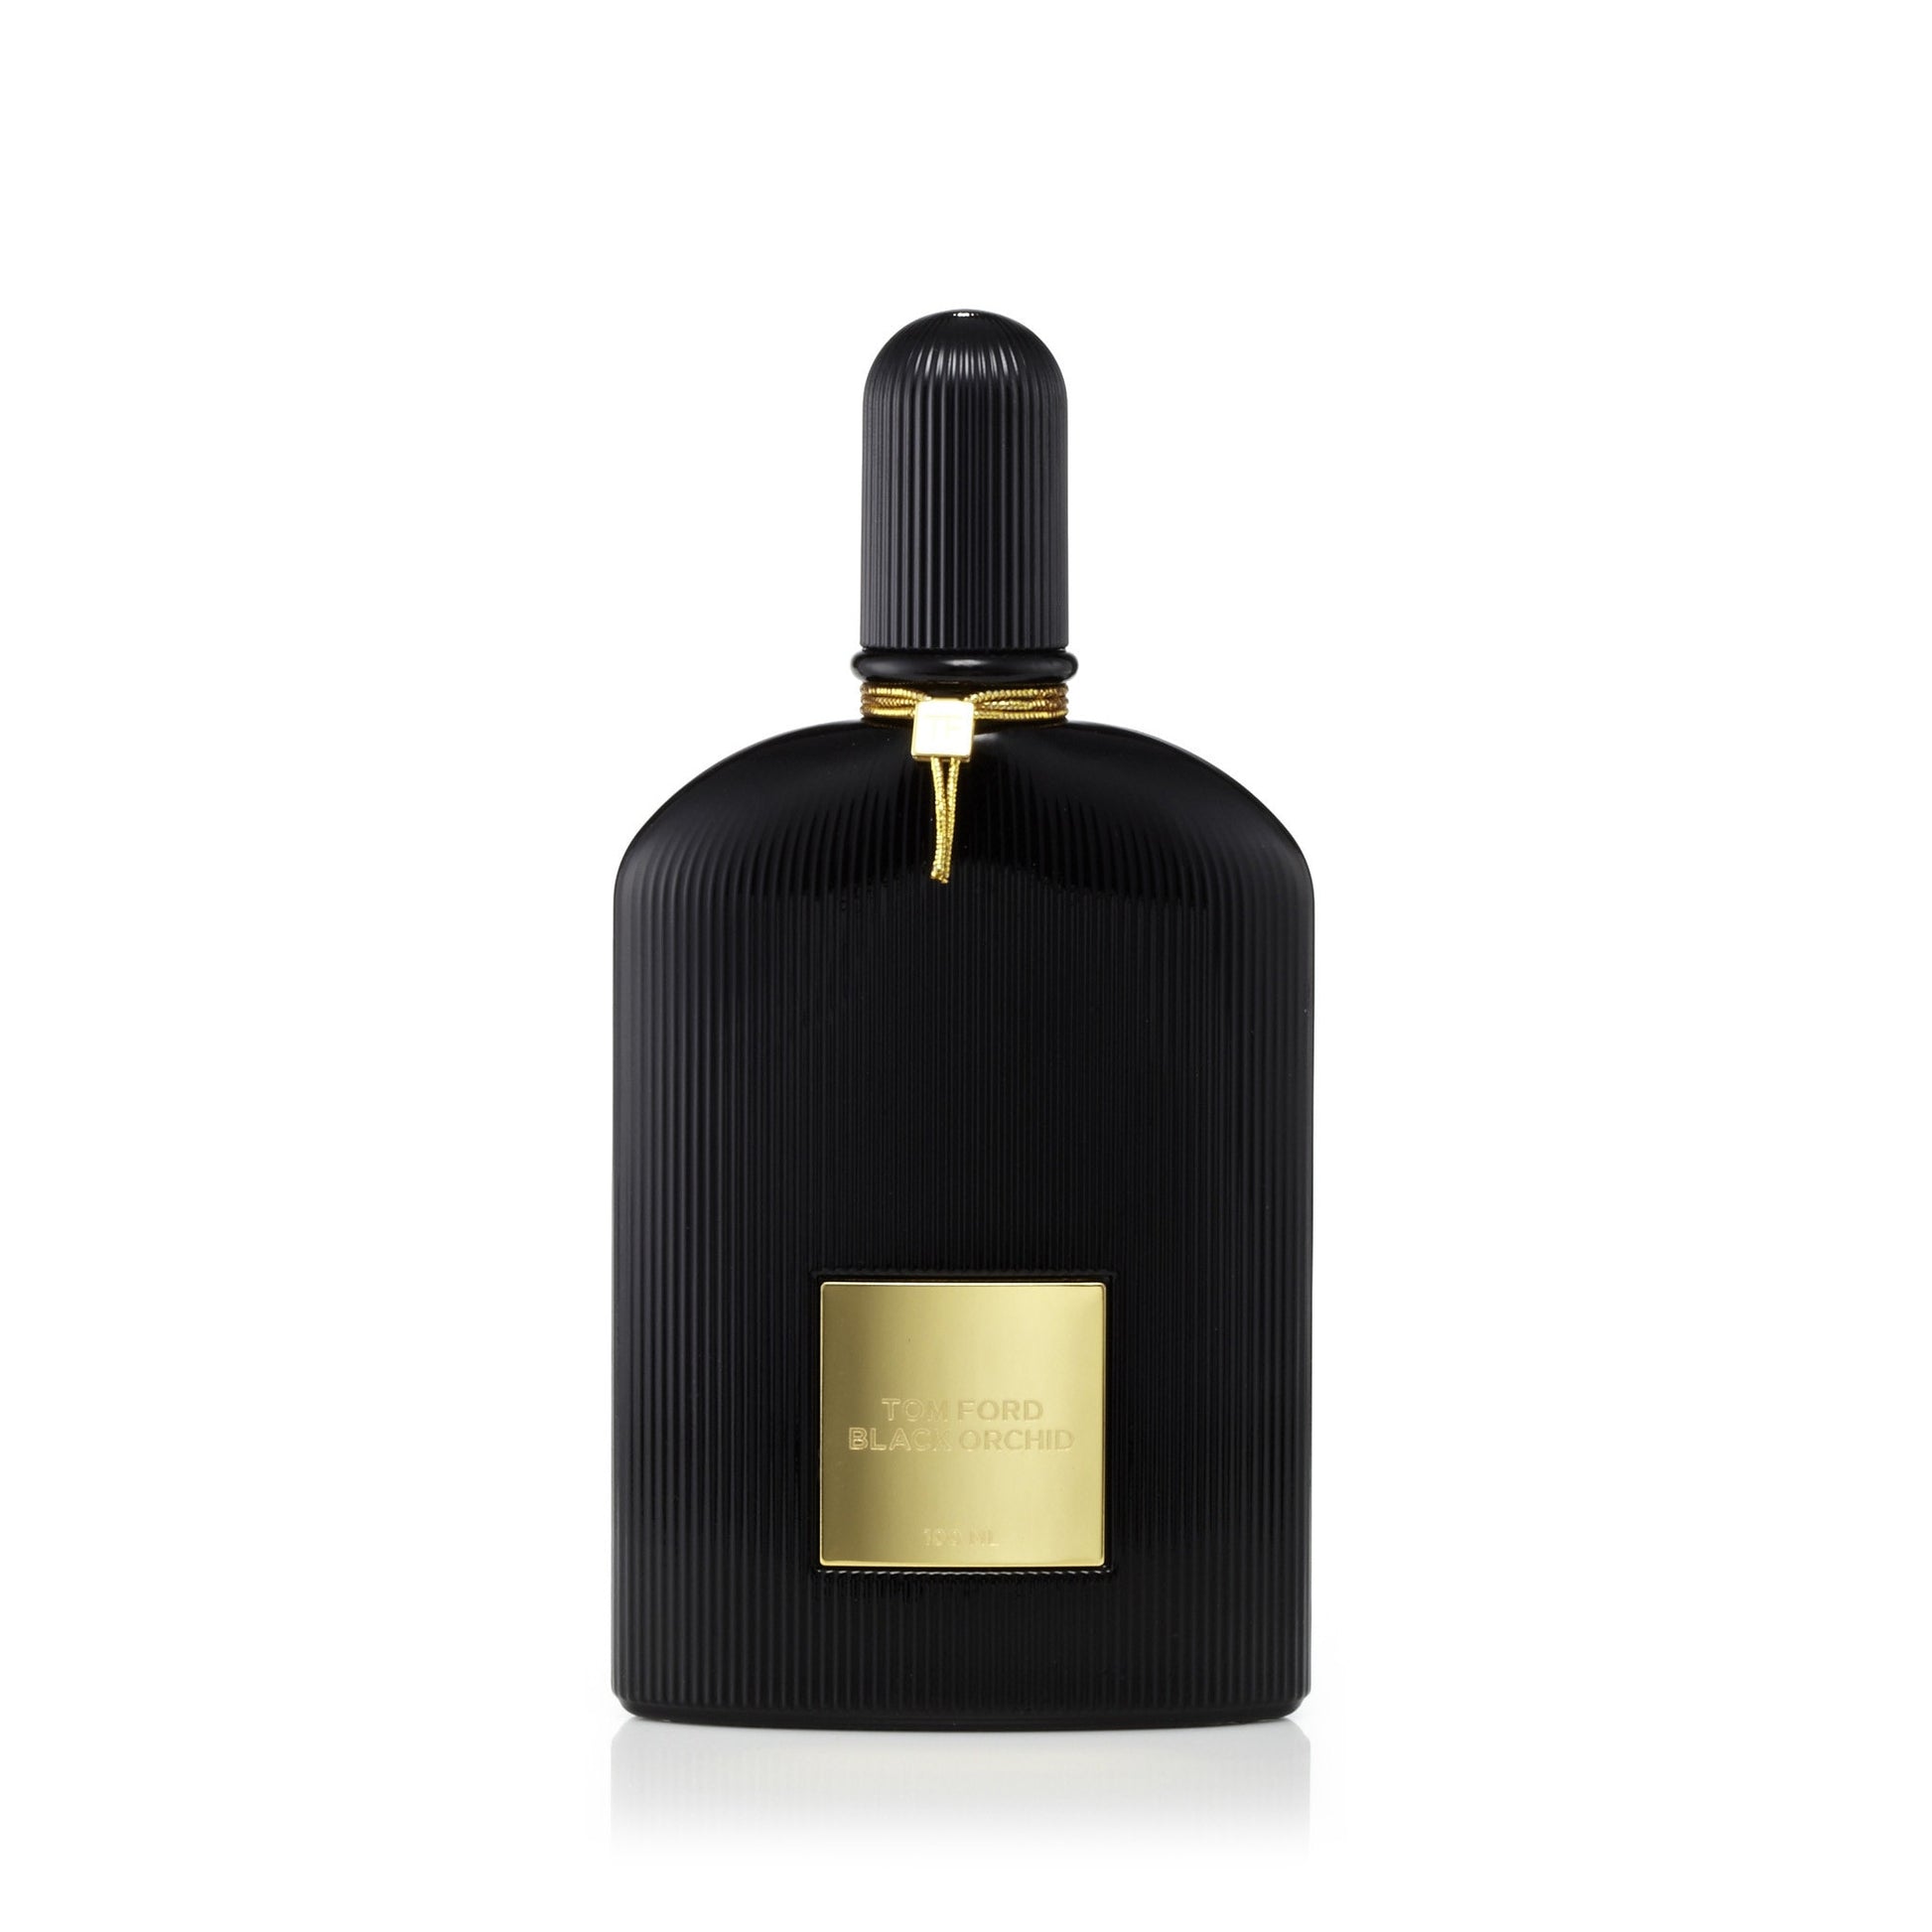 Black Orchid Eau de Parfum Spray for Women by Tom Ford, Product image 2